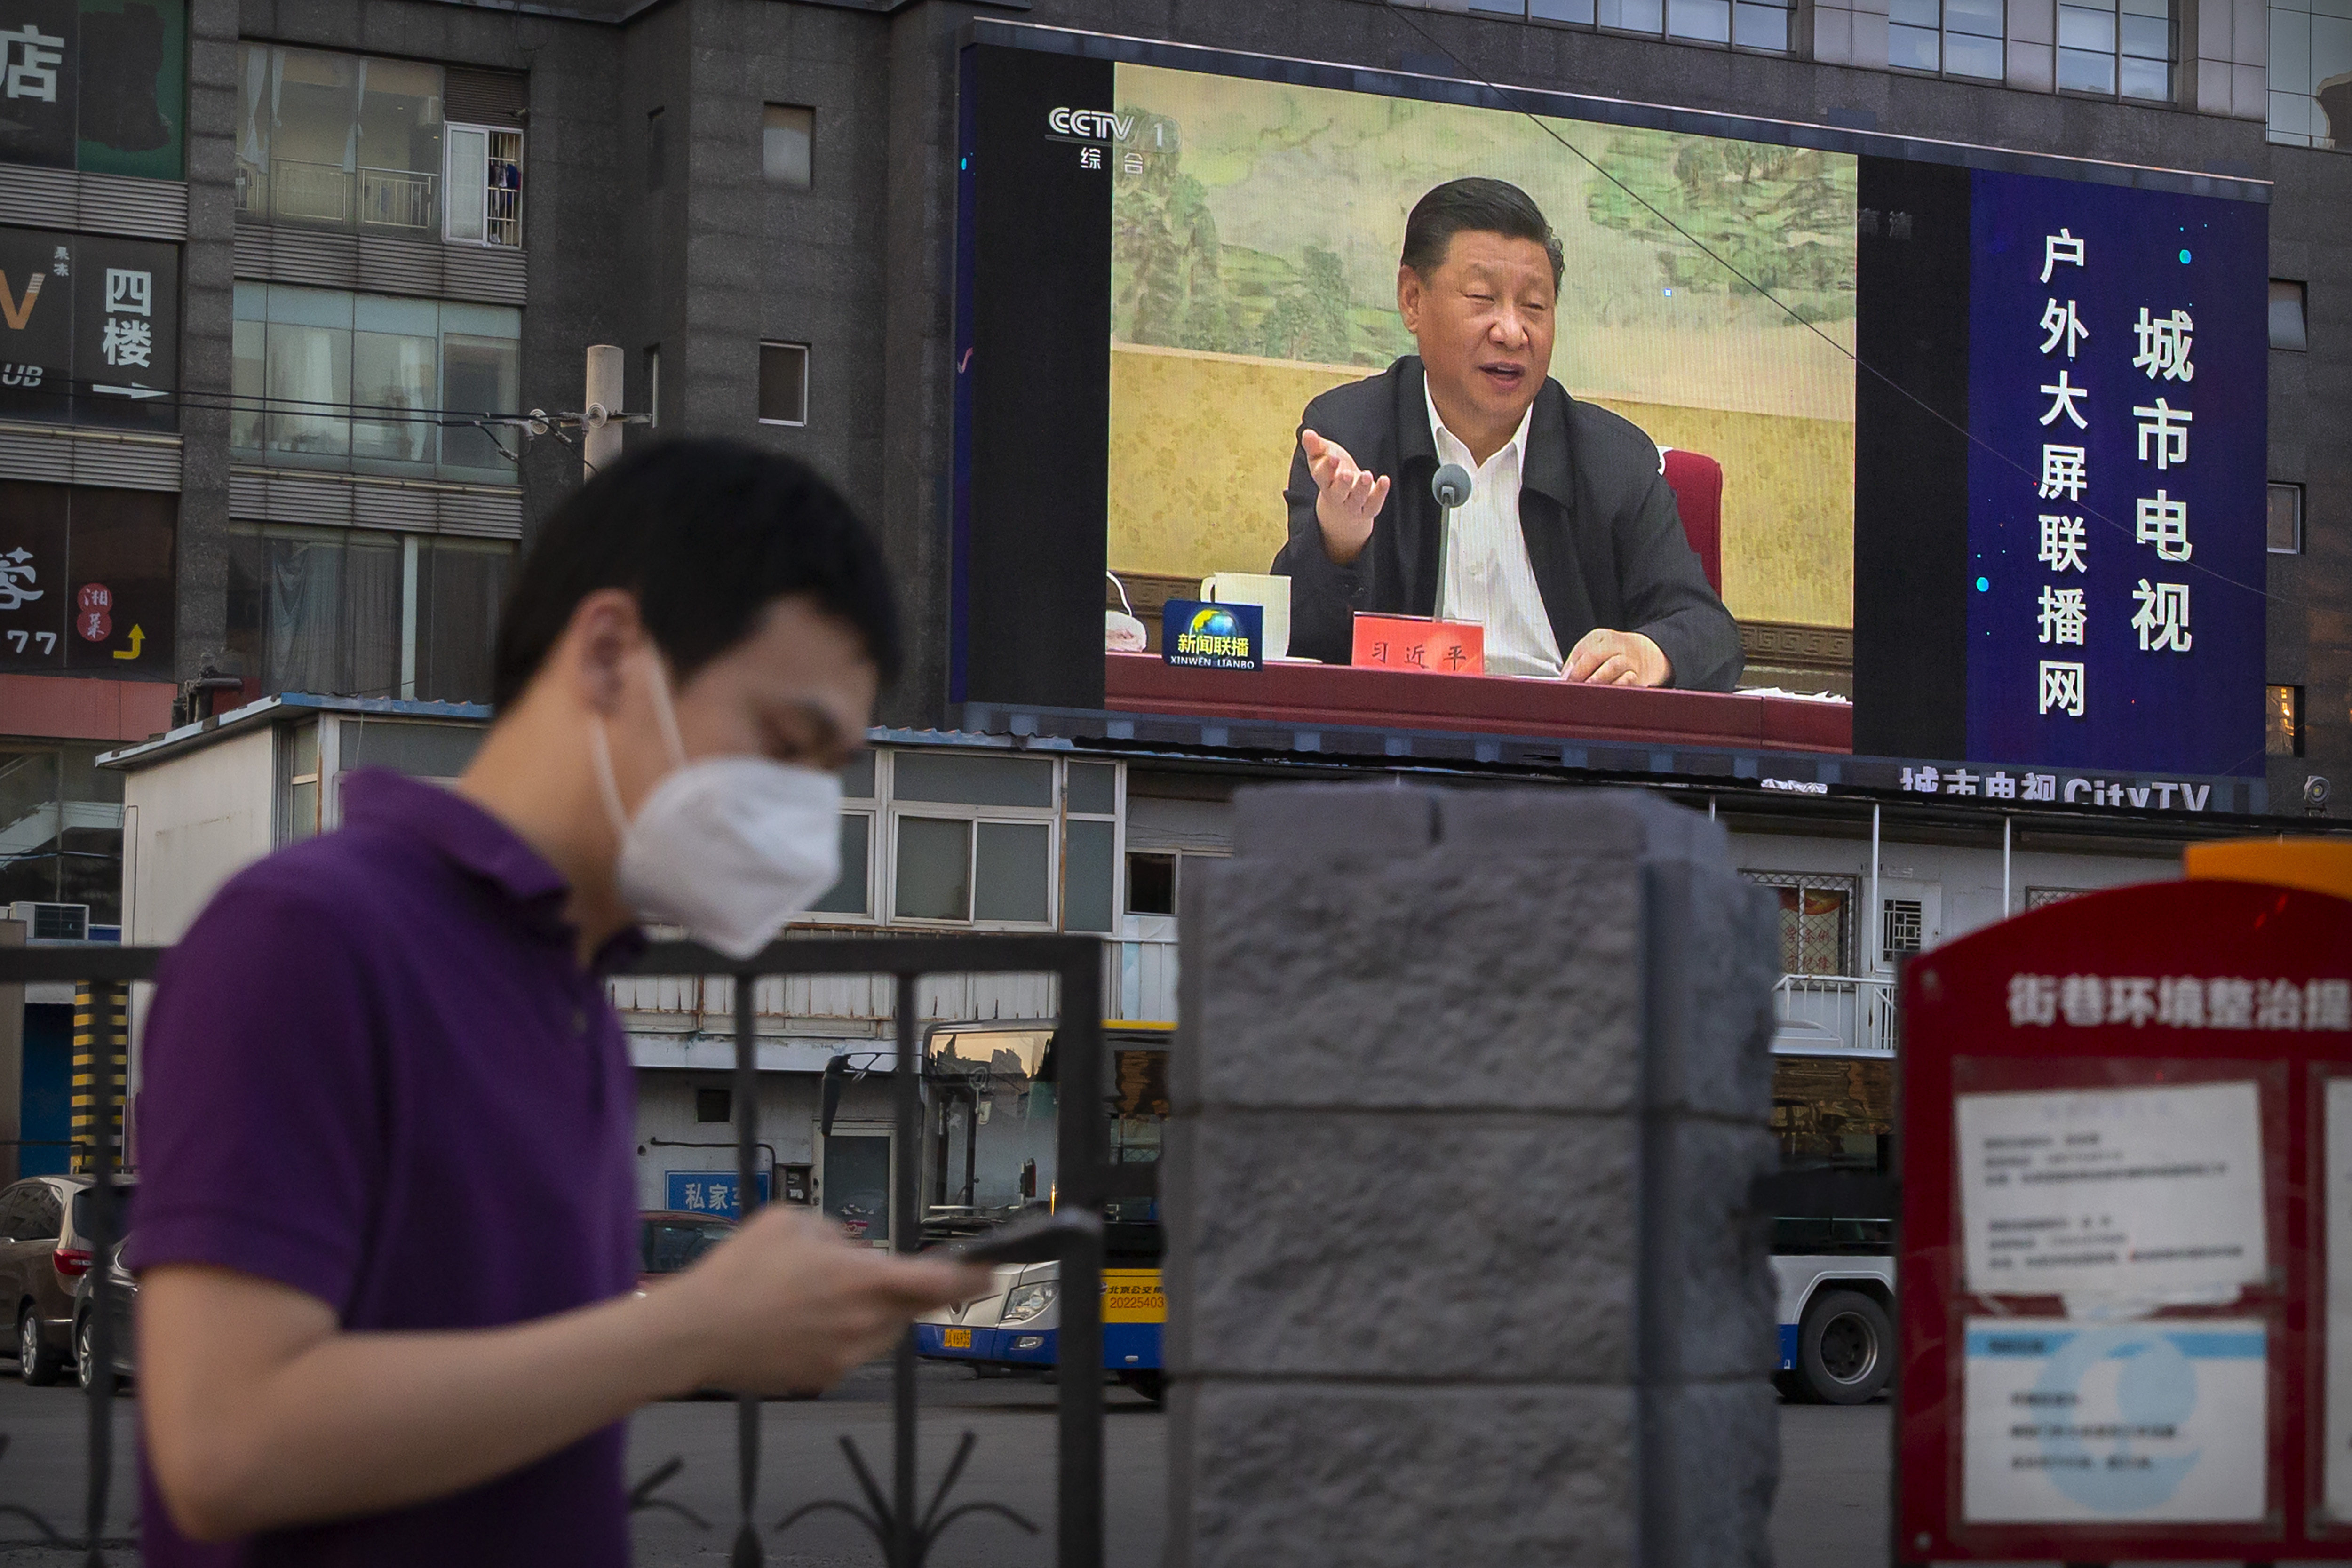 A man looks at his phone while walking past 
a giant screen in Beijing showing Chinese President Xi Jinping. In China, internet code words referring to Xi are banned on social media. Photo: AP 